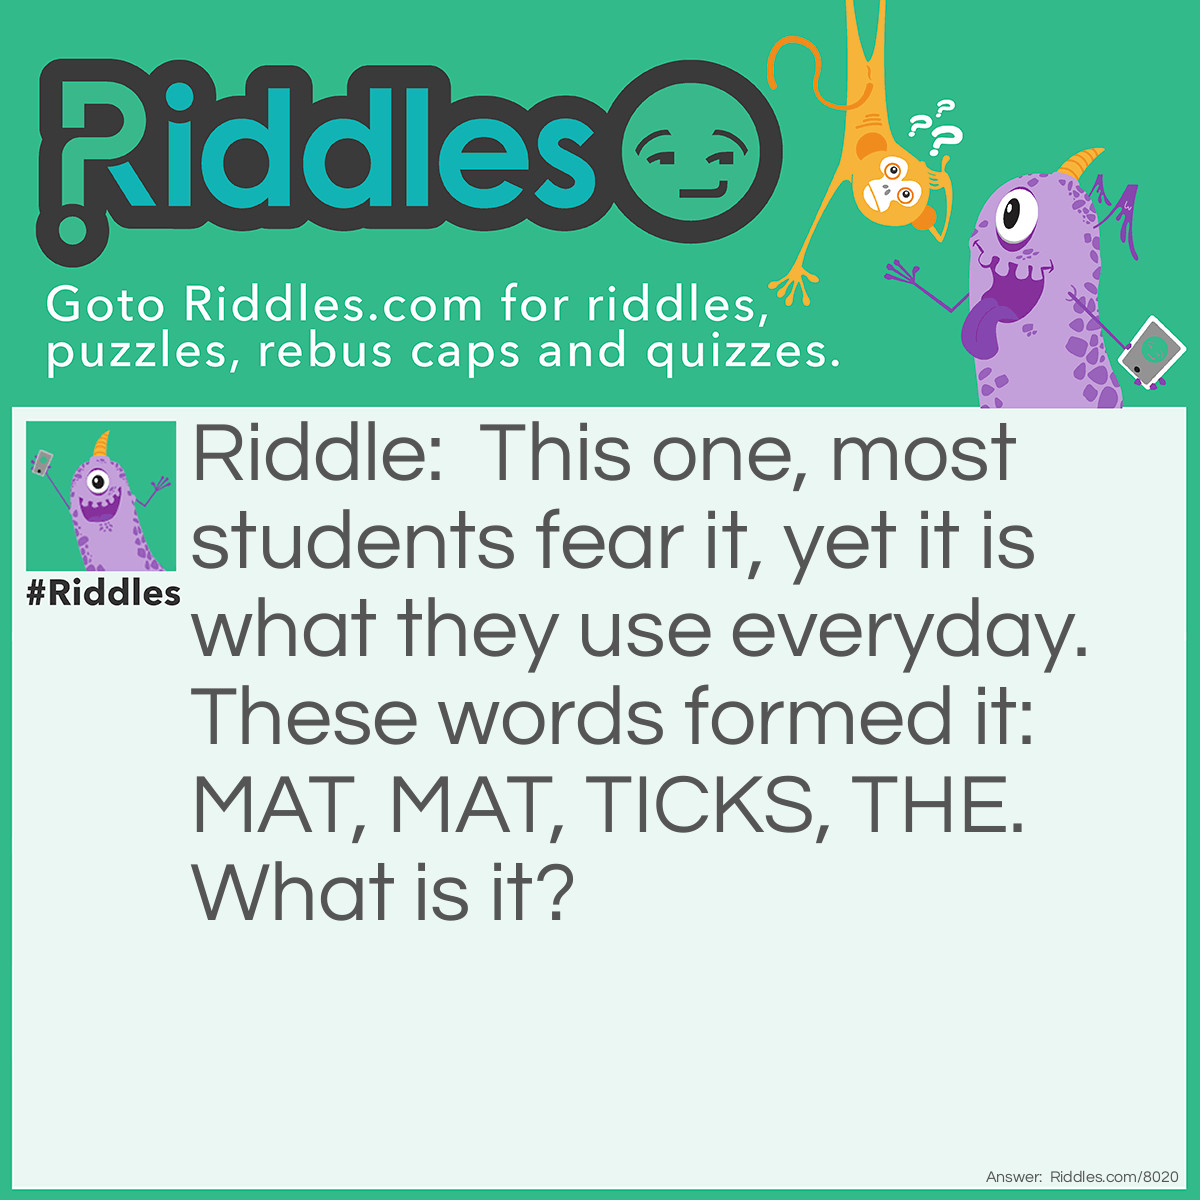 Riddle: This one, most students fear it, yet it is what they use everyday. These words formed it: MAT, MAT, TICKS, THE. What is it? Answer: MATHEMATICS.